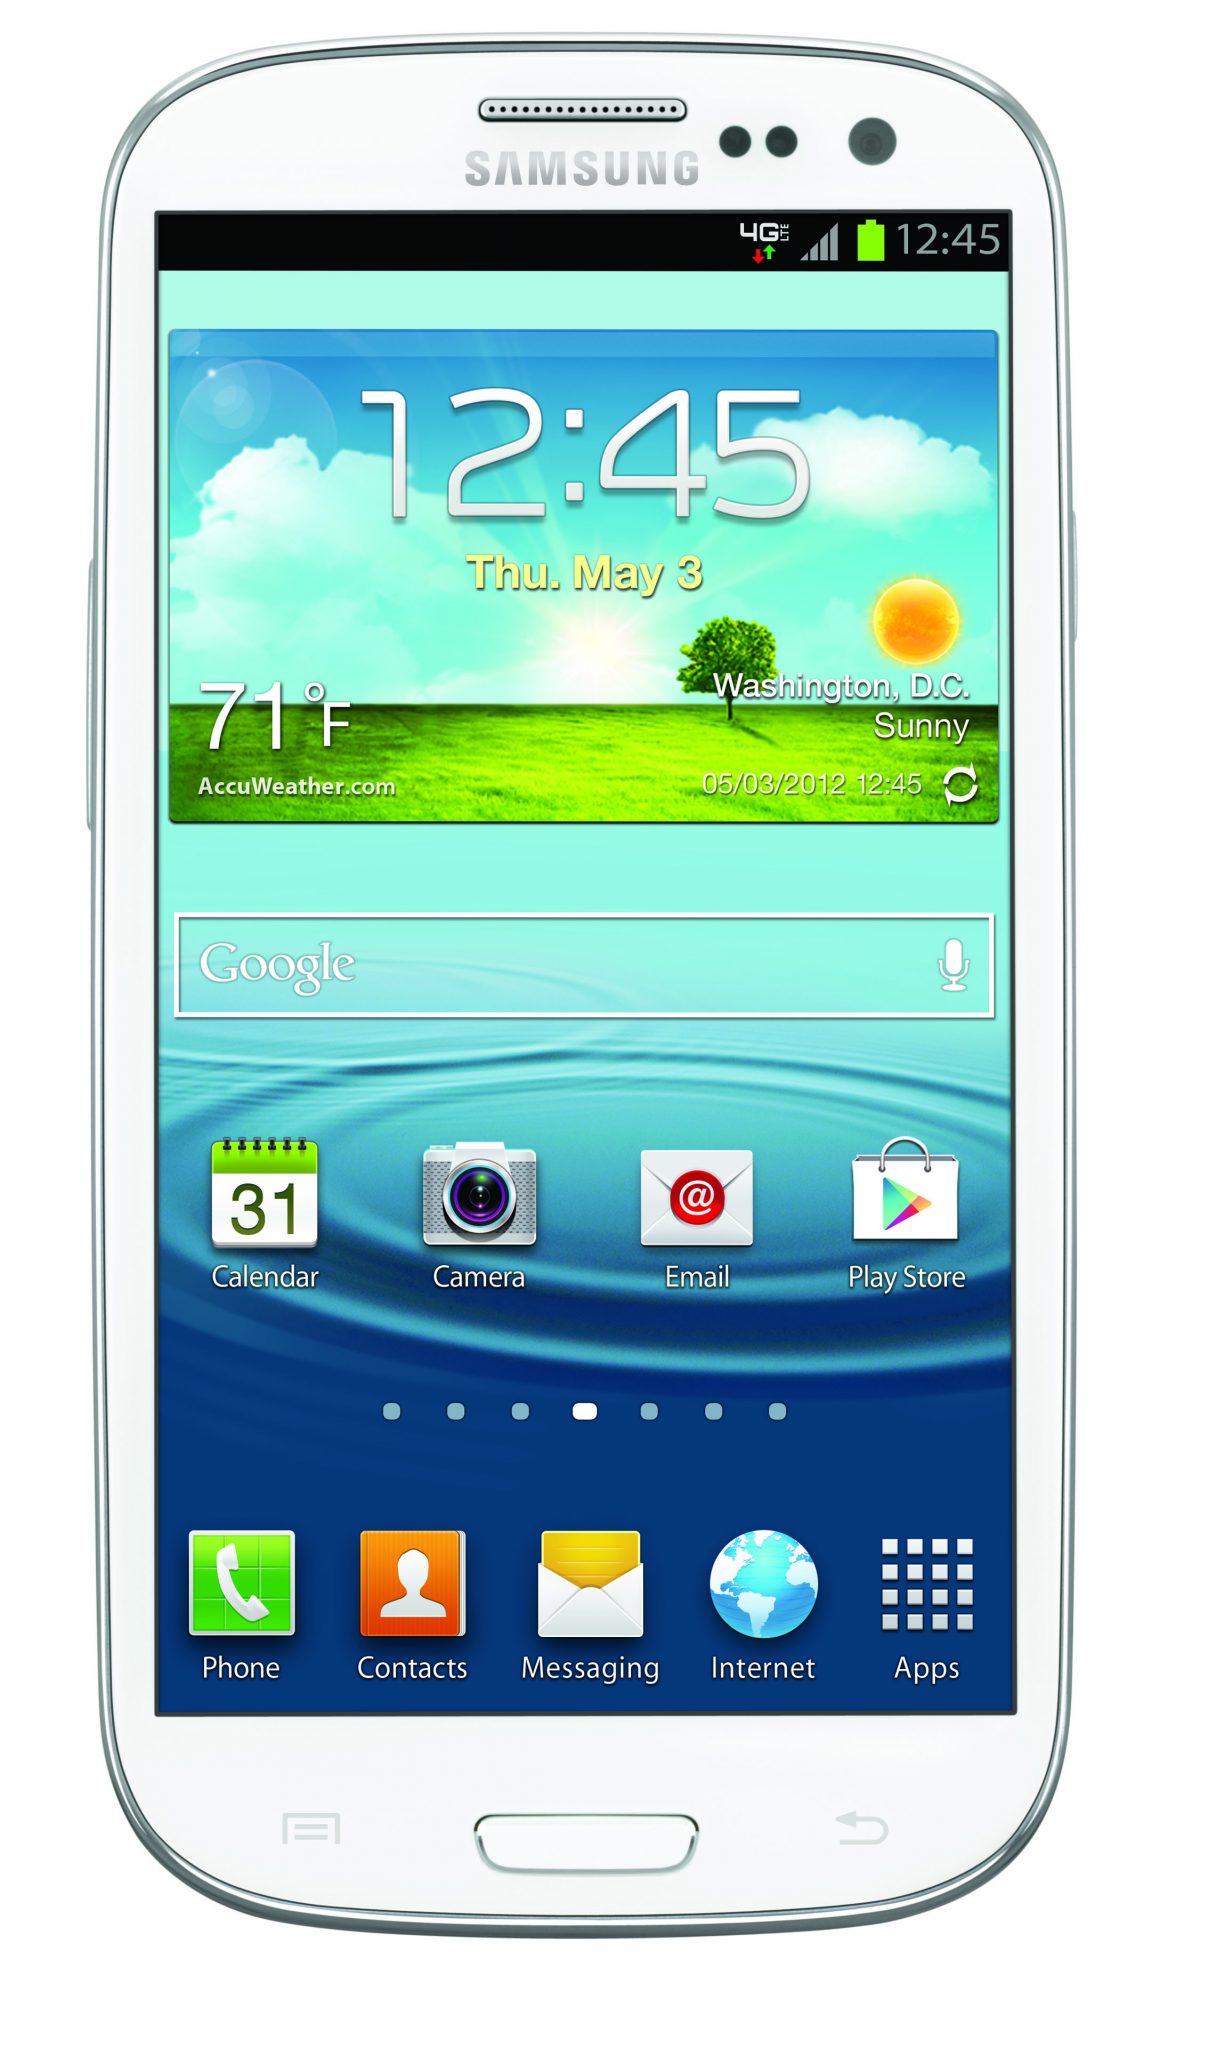 Samsung Galaxy SIII Now Official For Verizon